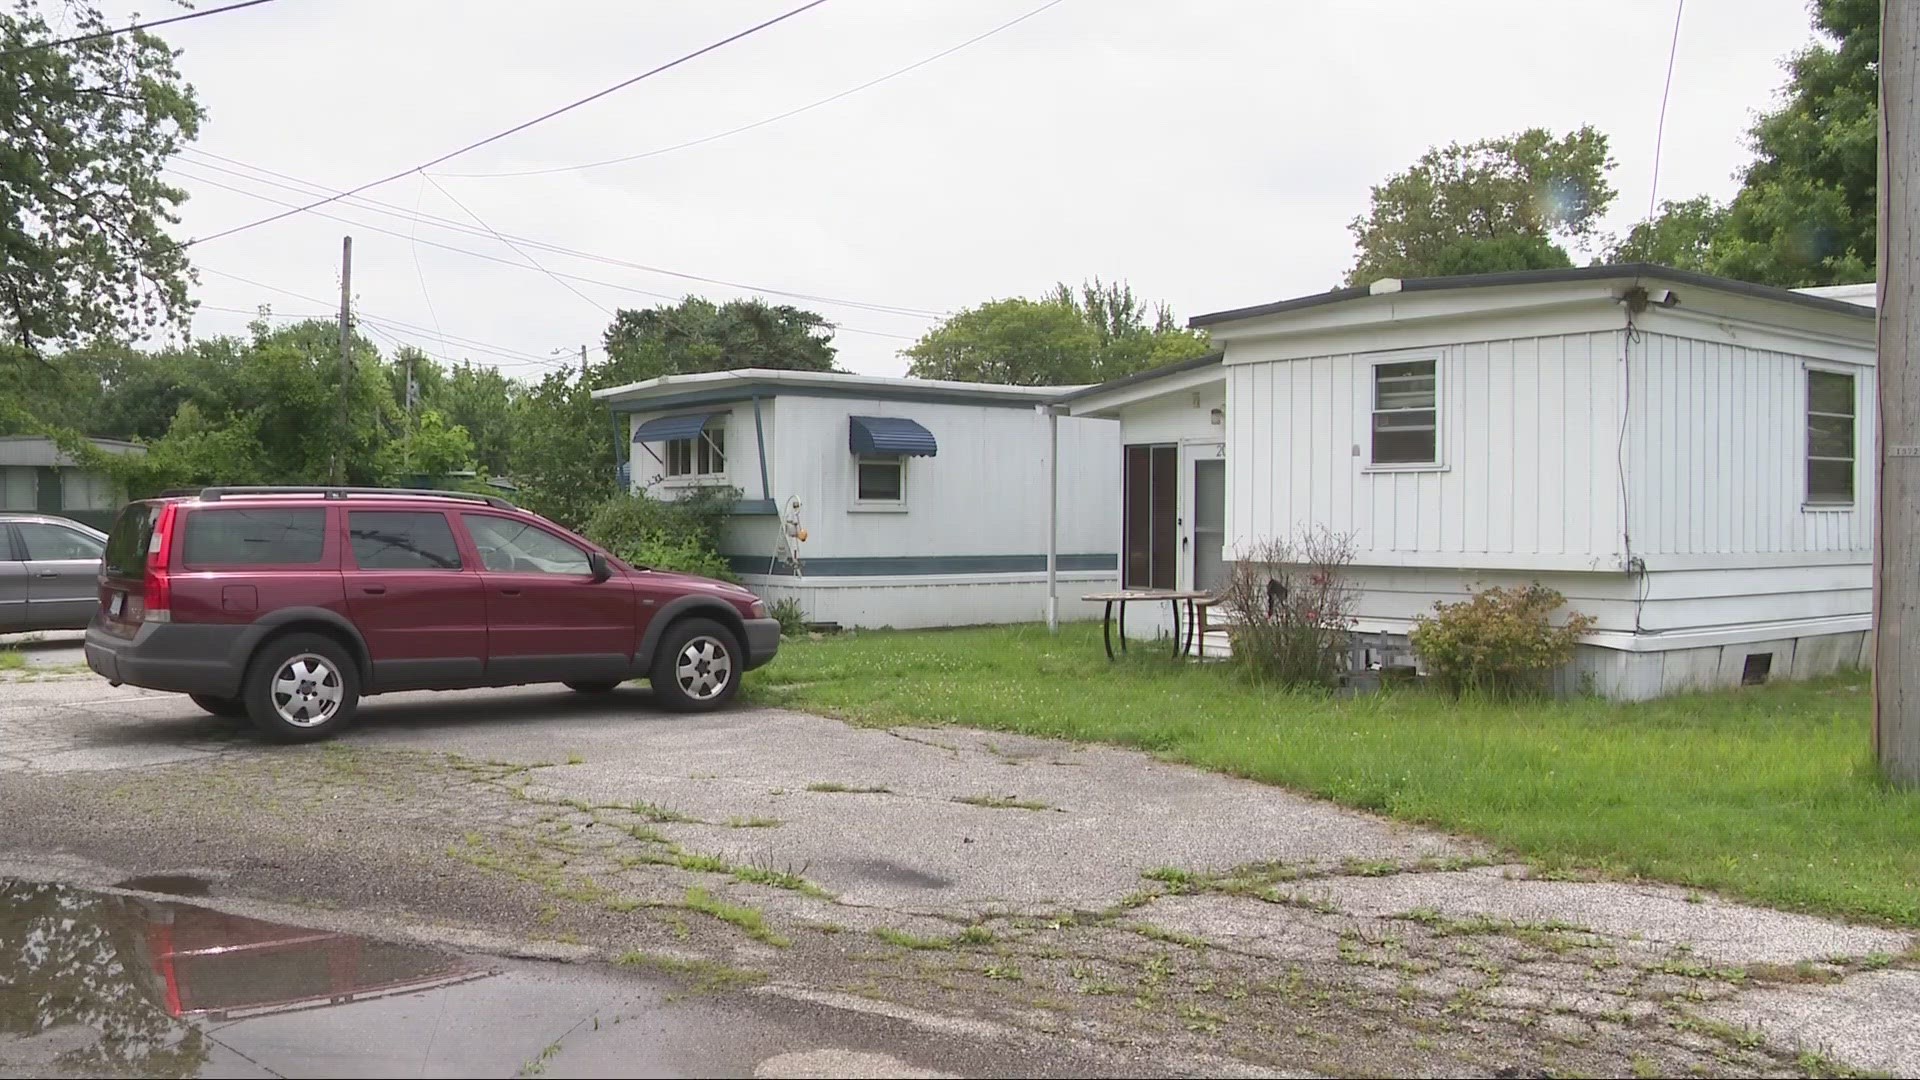 Euclid Beach Mobile Home Park is slated to be demolished to make room for a new, 'world-class regional park.' However, questions and controversy remain.